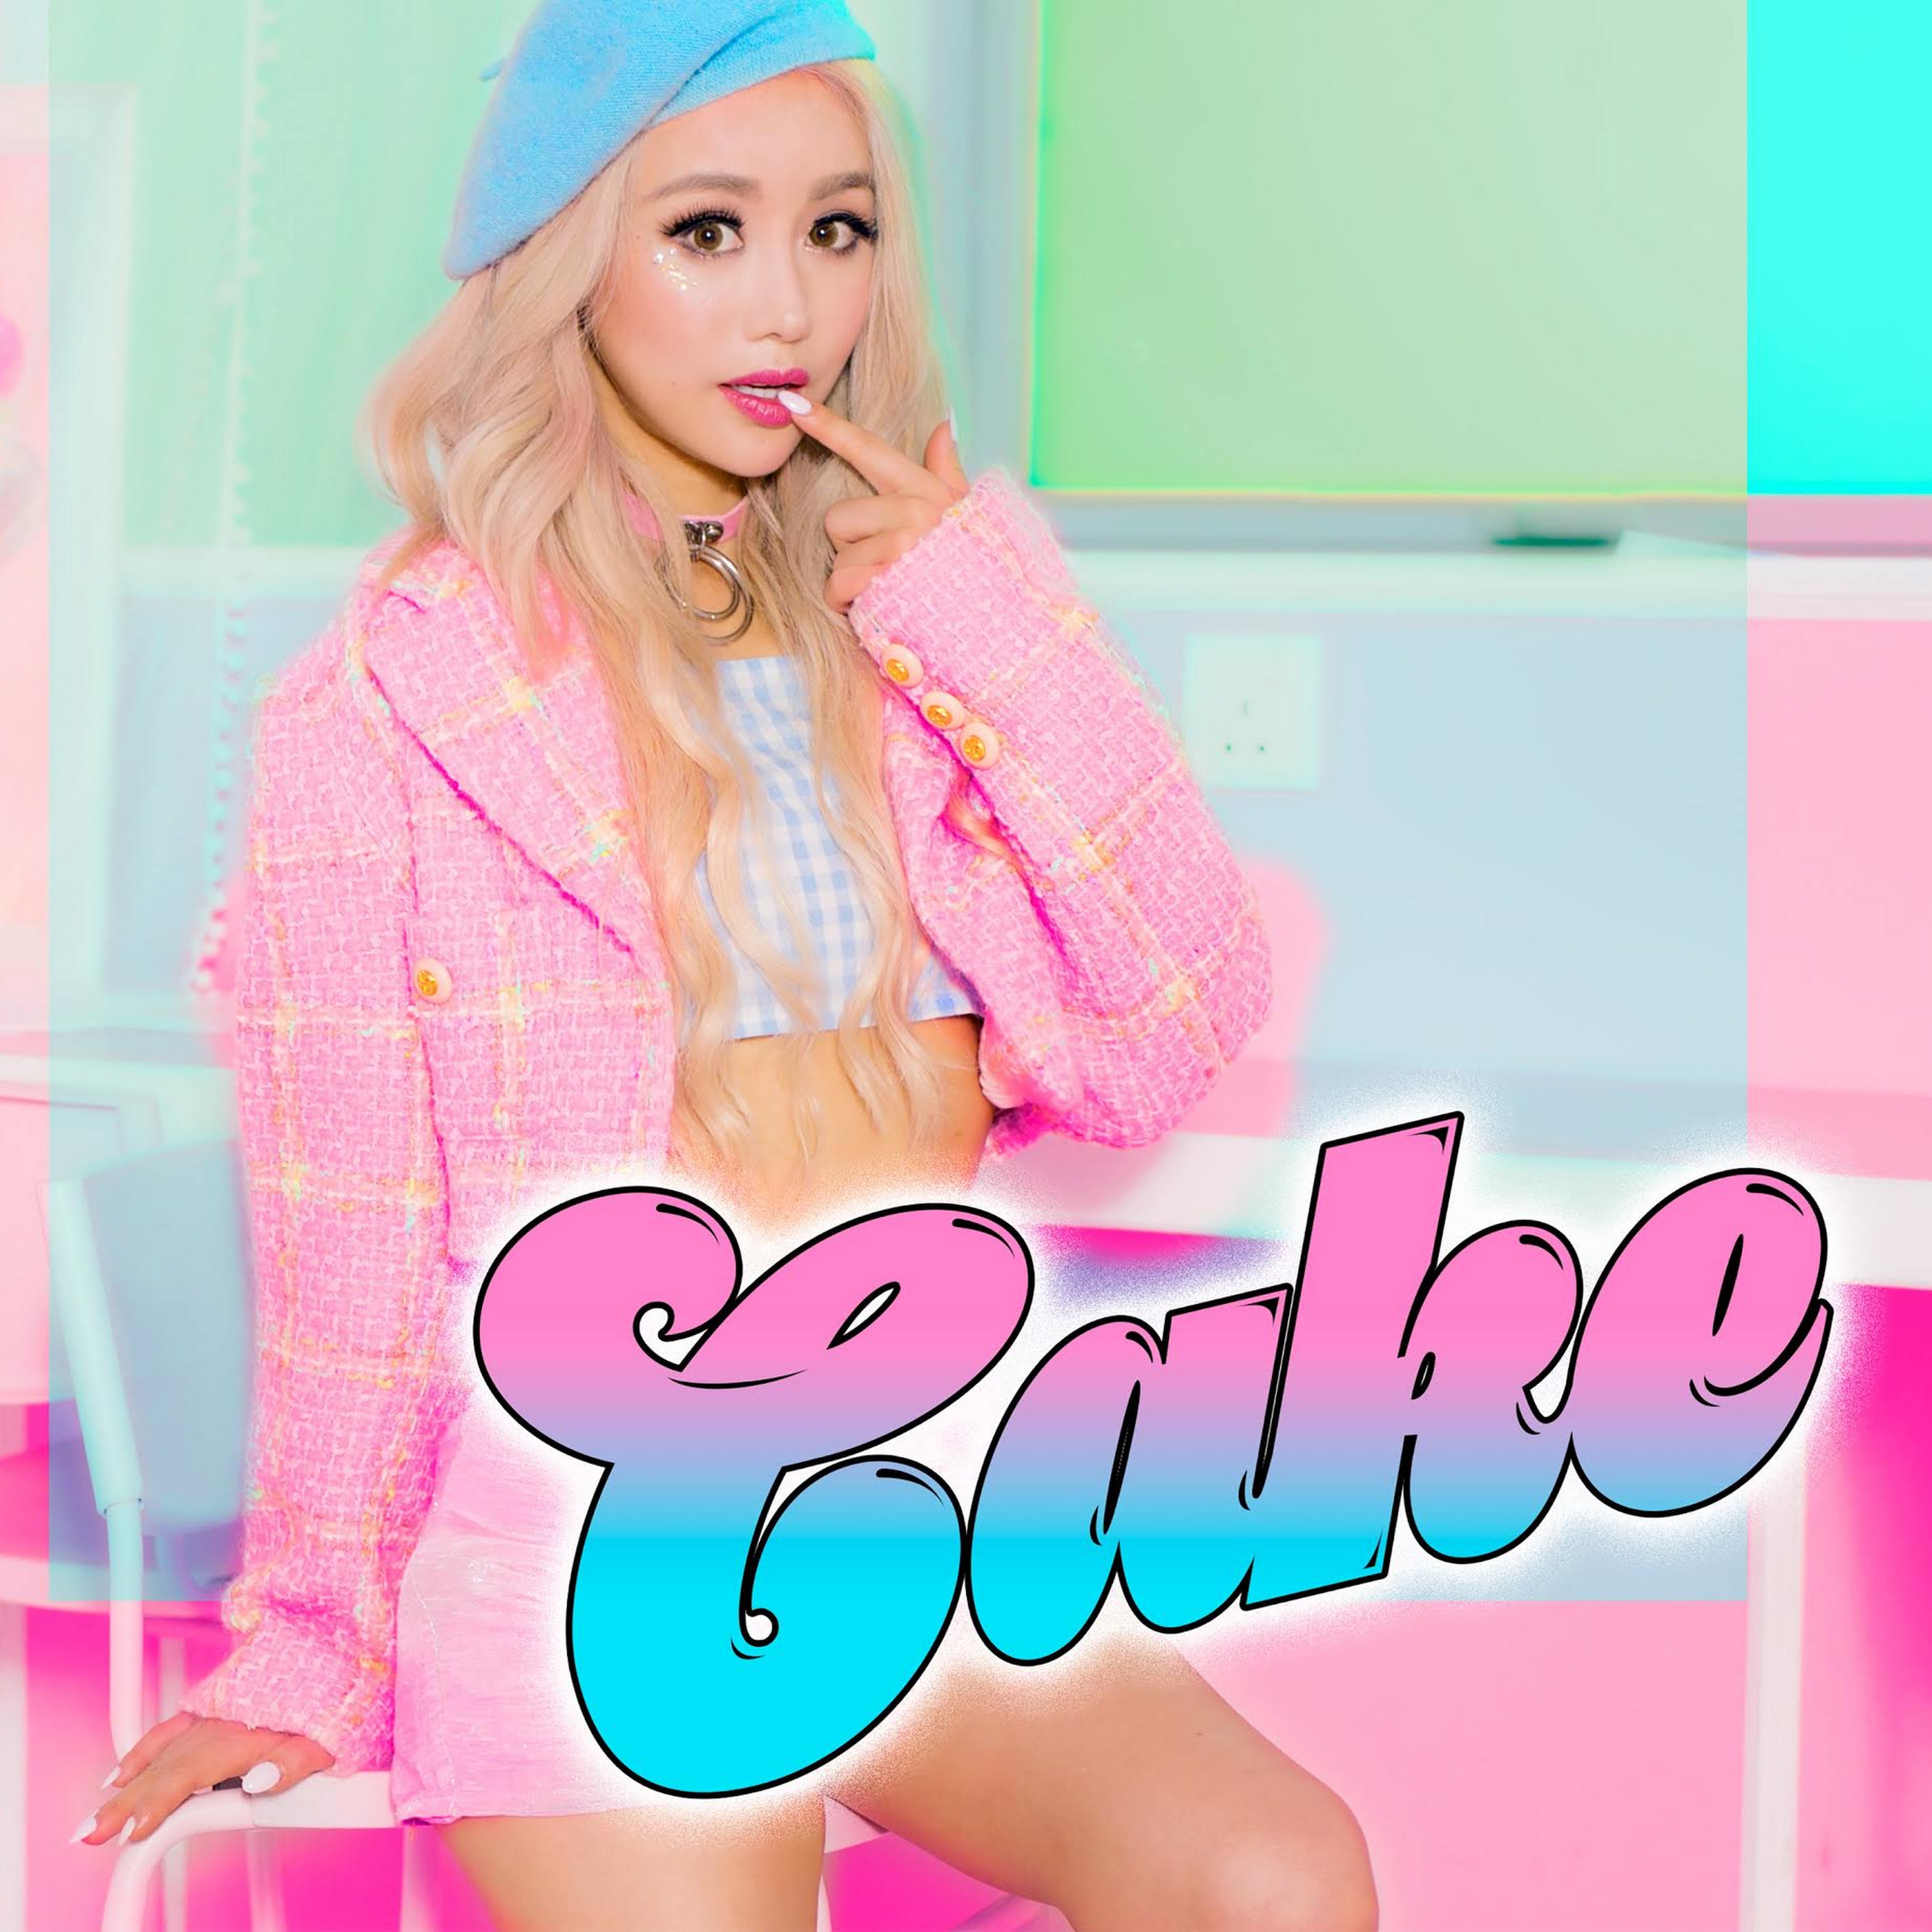 Wengie 'CAKE' MV (Official Music Video) - YouTube